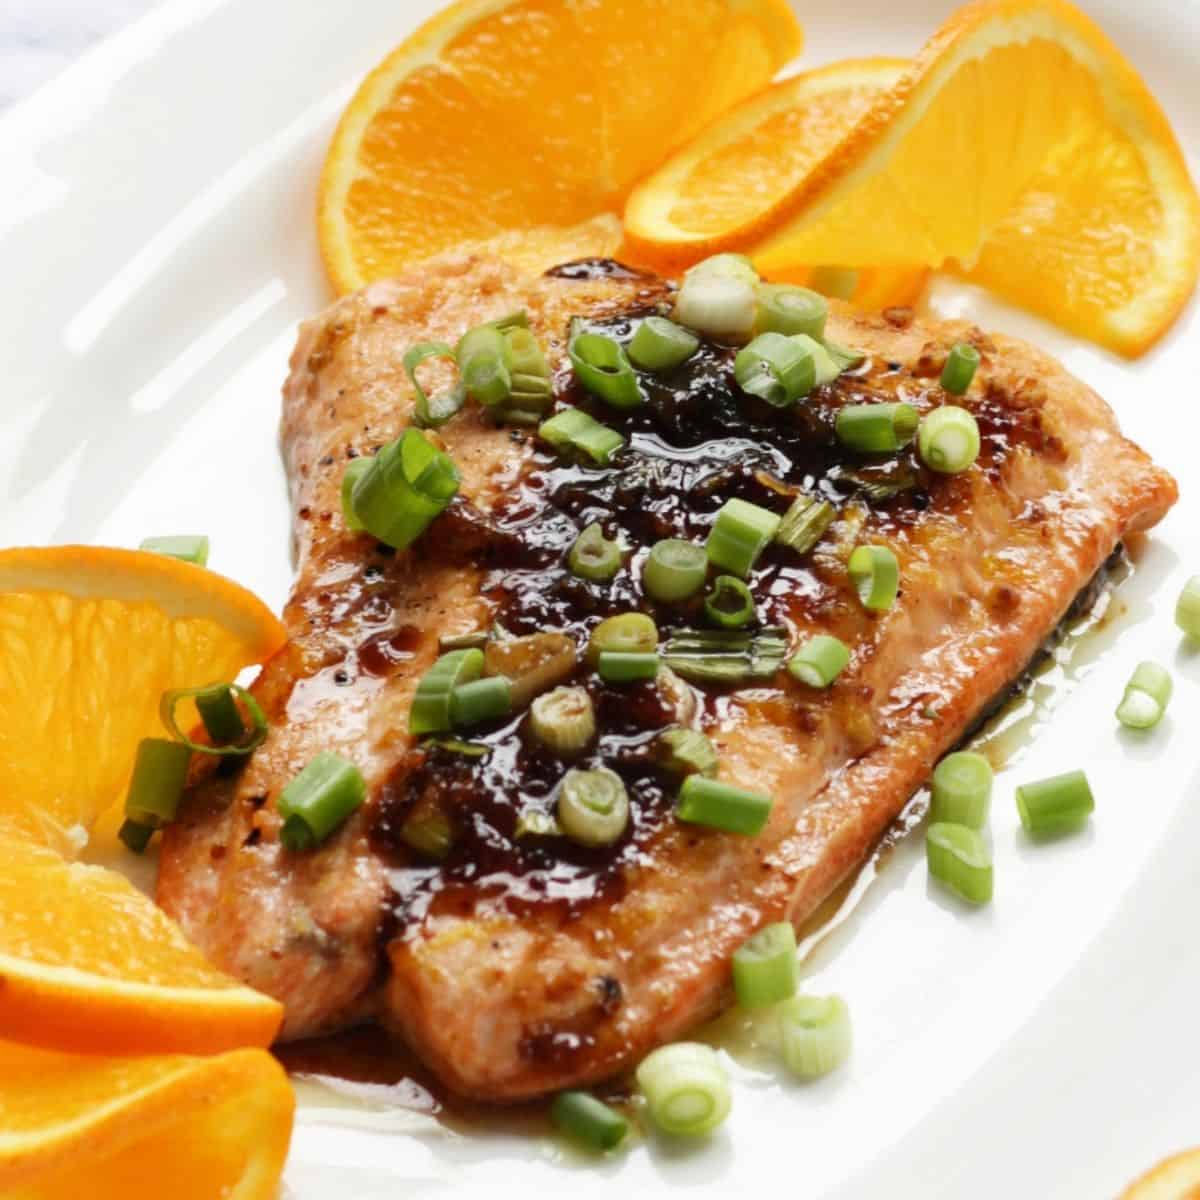 glistening salmon topped with brown sauce and chopped green onions, surrounded by thin orange slices, arranged on a white plate